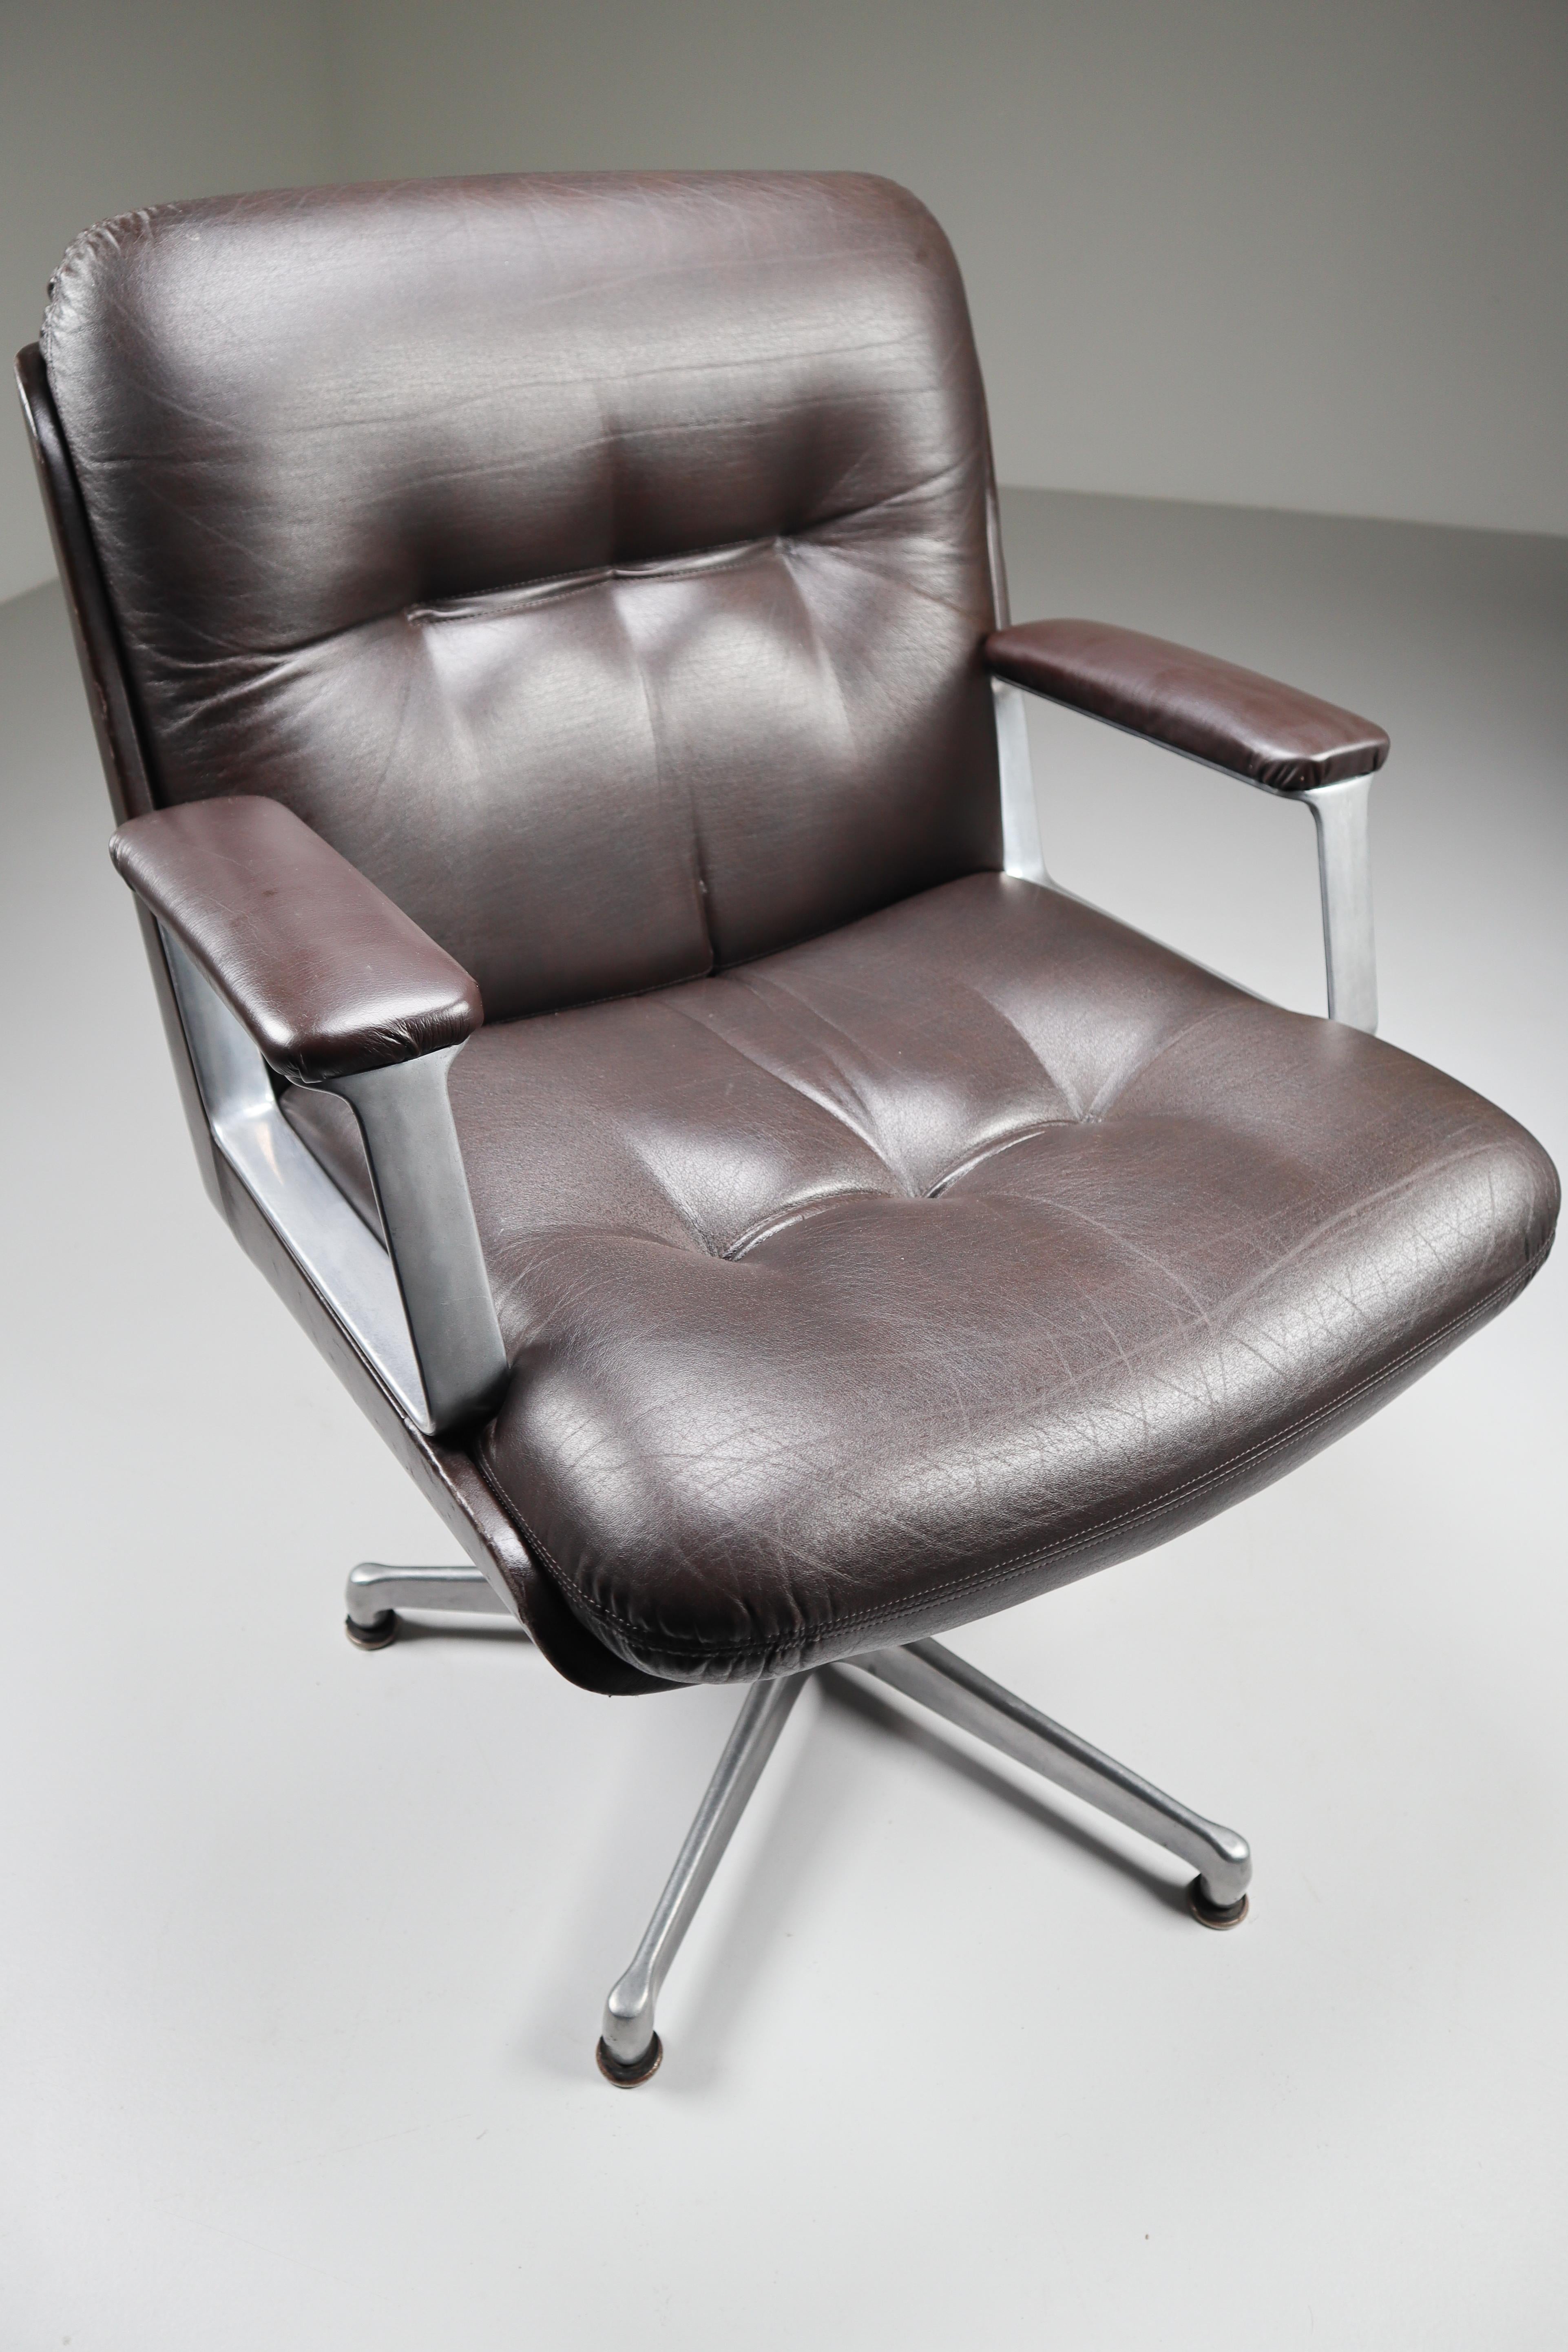 Executive office armchair by Osvaldo Borsani for the Italian manufacturer Tecno features an elegant brown leather body with a generously proportioned button-tufted leather seat and back and floating on a five-pronged cast aluminum base. Super